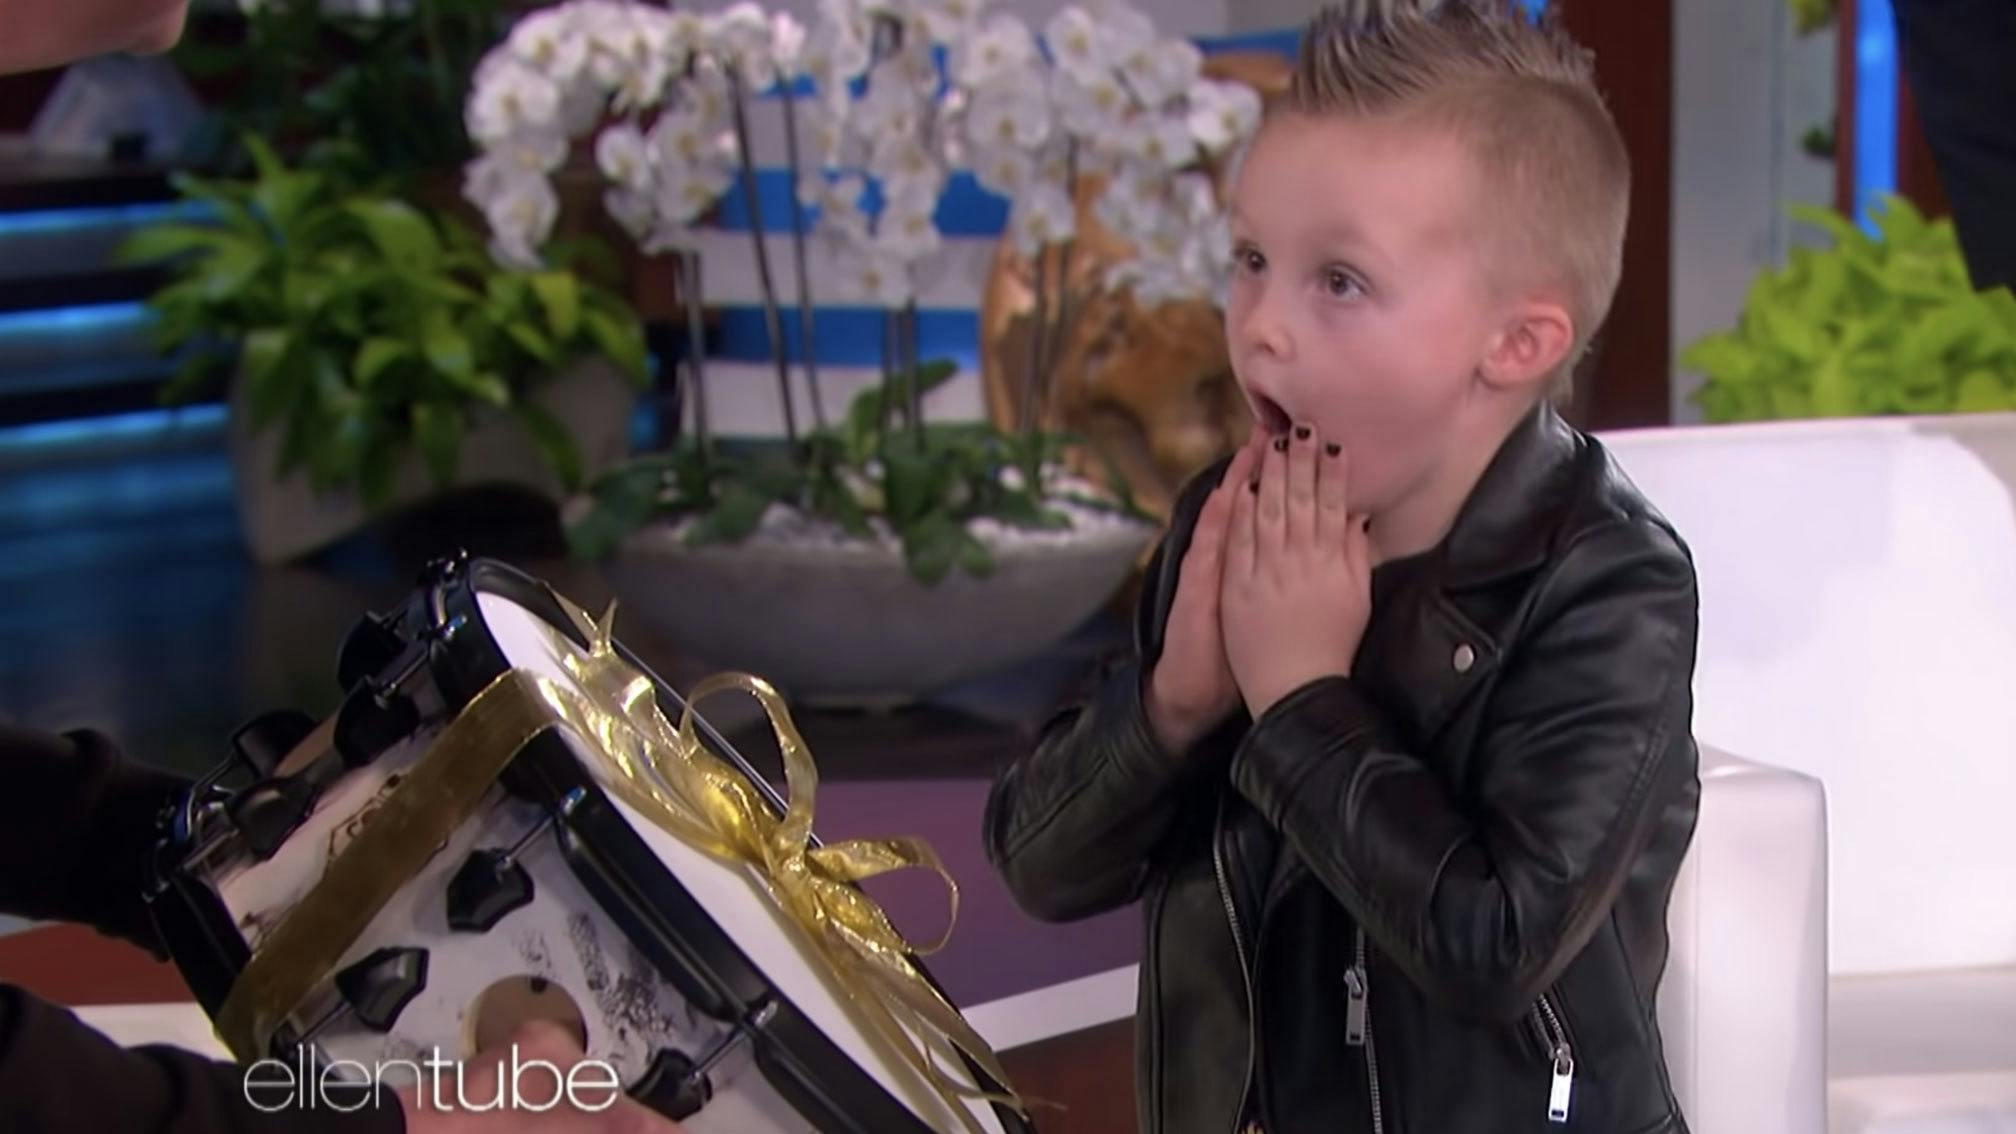 Seven-year-old covers Slipknot’s Sulfur on Ellen, gets surprised with Jay Weinberg signature snare